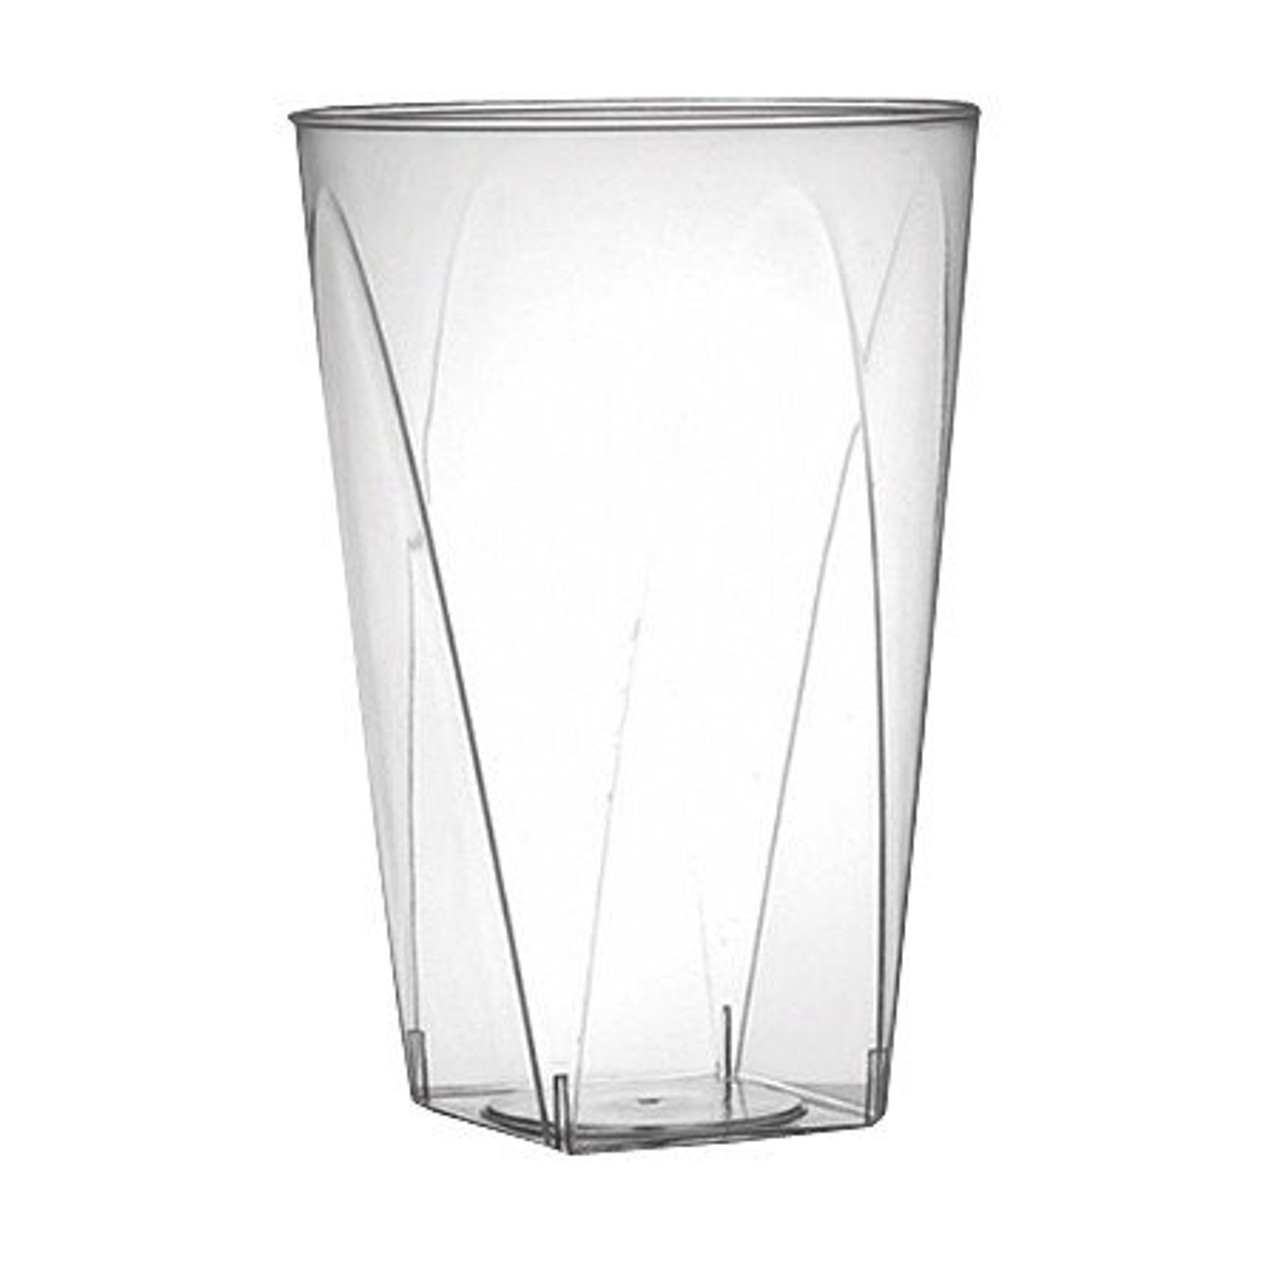 https://cdn11.bigcommerce.com/s-hgqmwywp99/images/stencil/1280x1280/products/49193/43984/7oz-clear-plastic-square-bottom-tumbler-cup-case-of-60-3__11291.1675880312.jpg?c=1?imbypass=on